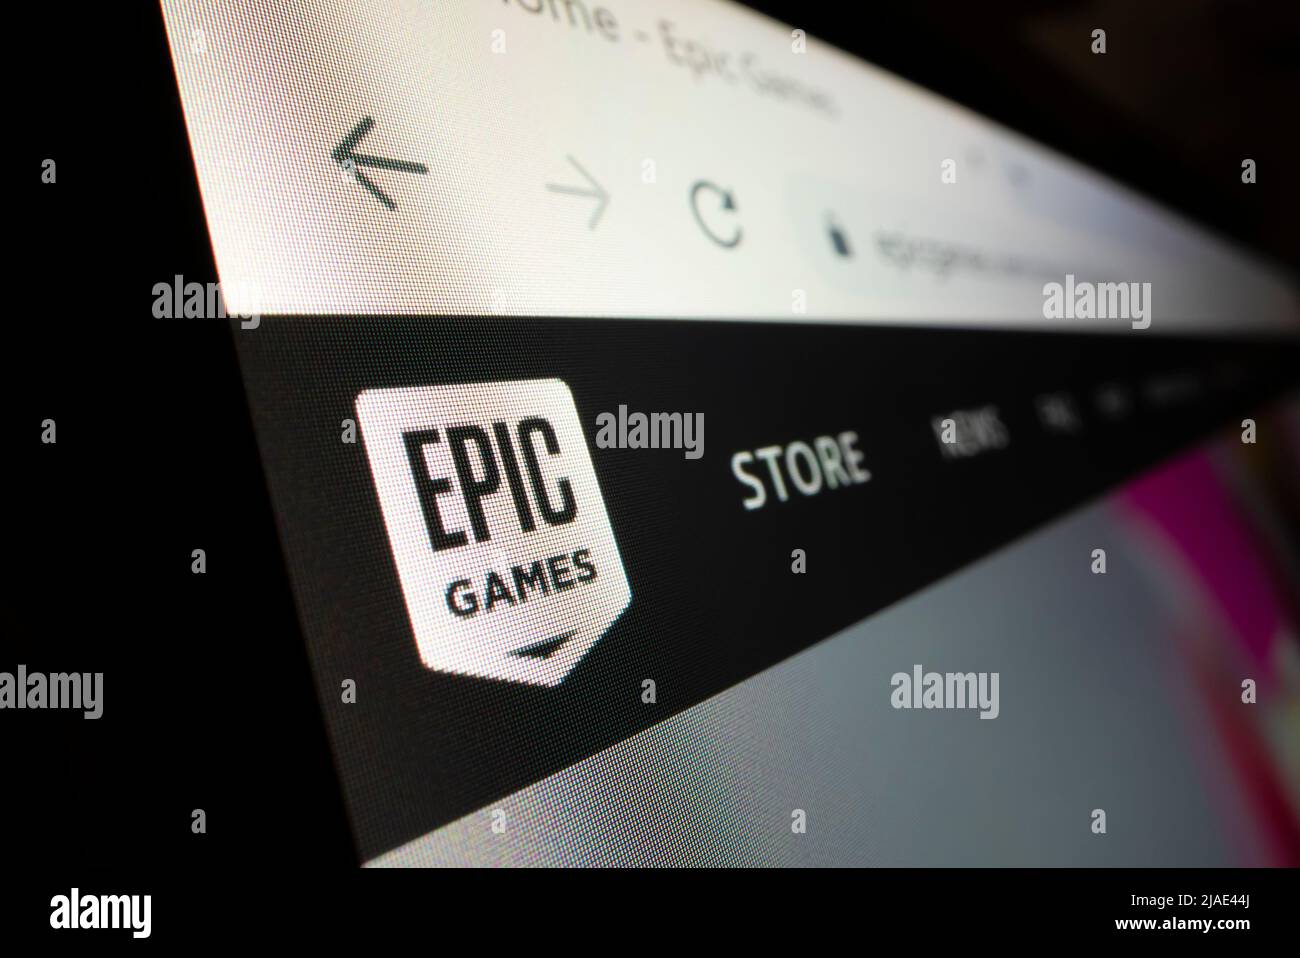 Melbourne, Australia - Feb 4, 2022: Close-up view of Epic Games logo on its website, shot with macro probe lens. Stock Photo